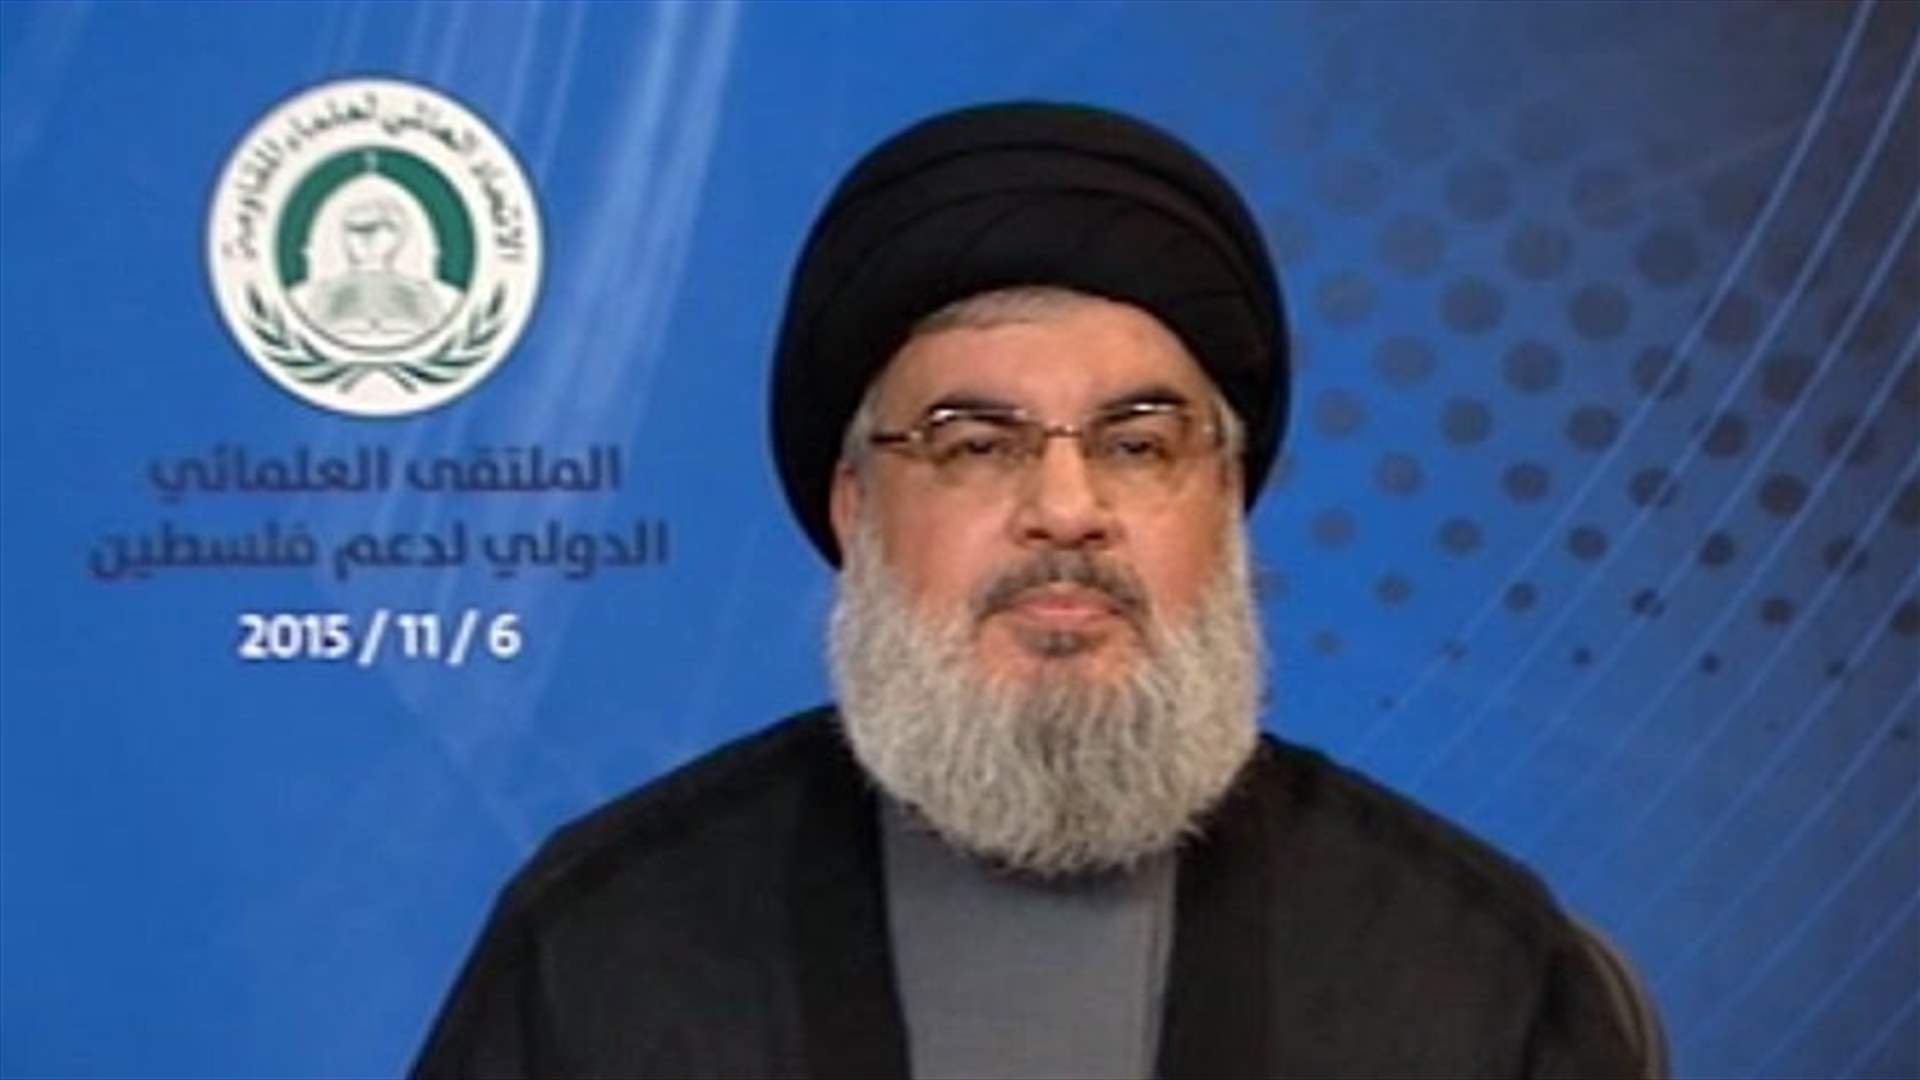 Hezbollah’s Nasrallah condemns turning the region’s conflict into Shiite-Sunni strife 